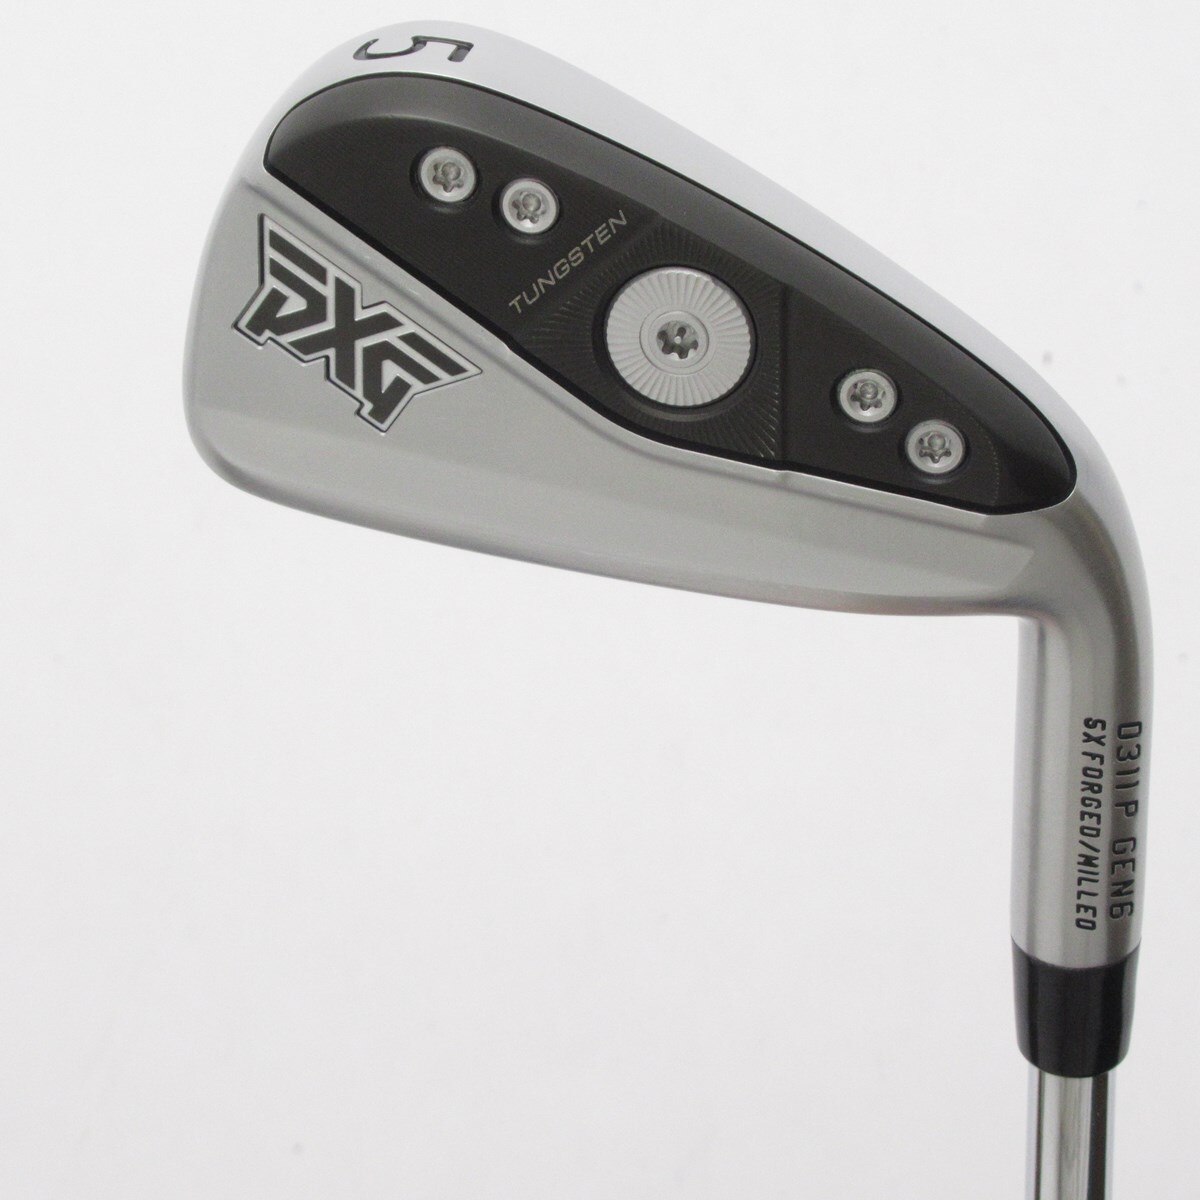 PXG 0311 P GEN6 中古アイアンセット ピーエックスジー PXG 通販｜GDO 